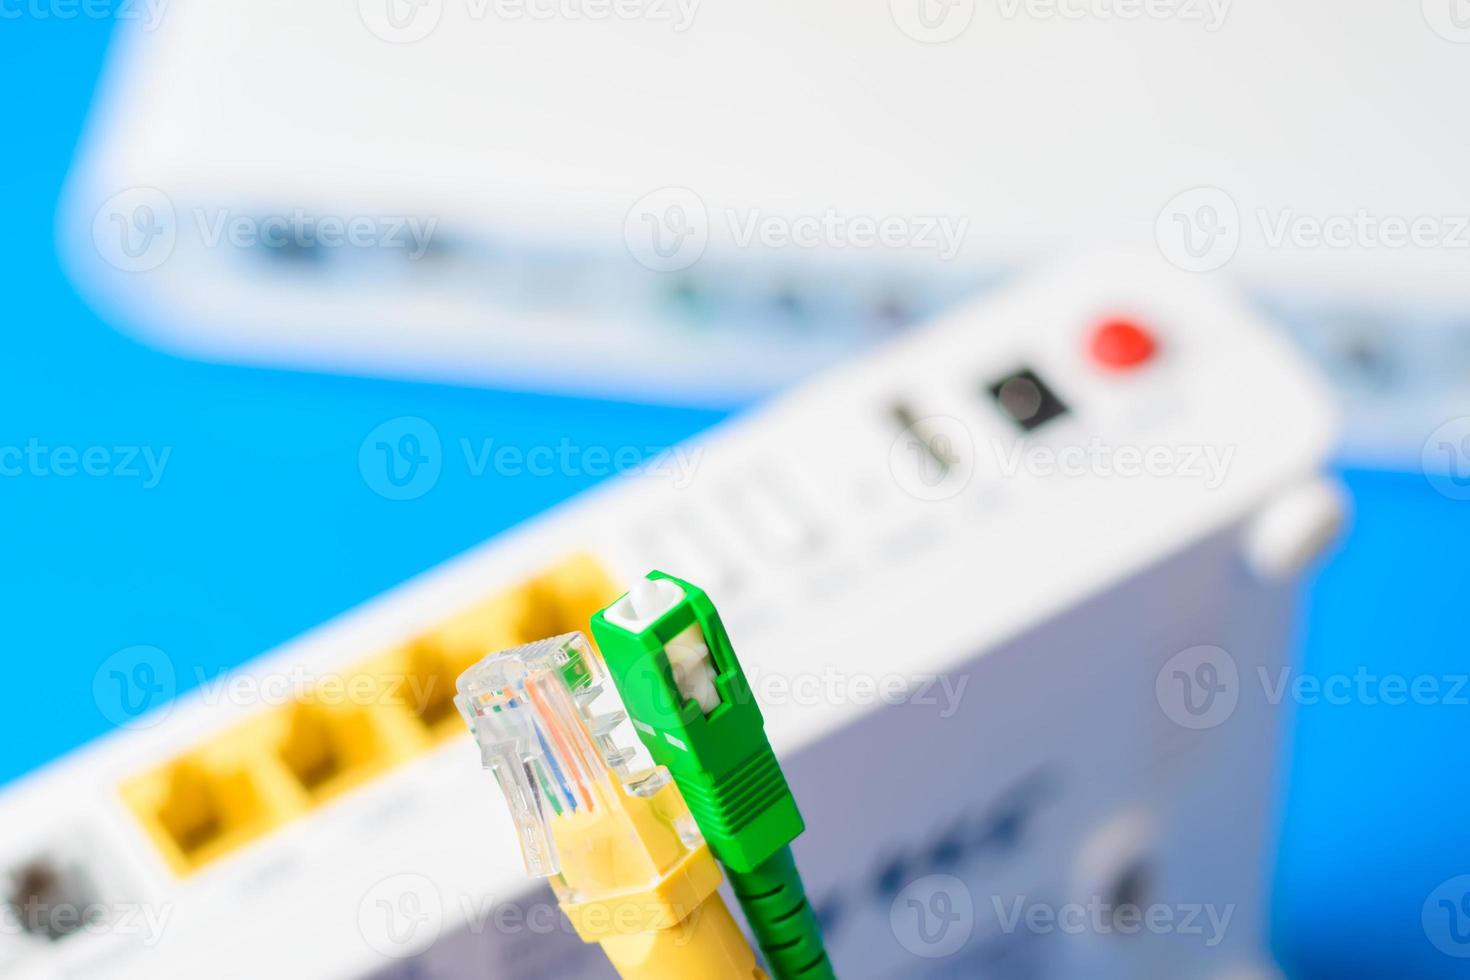 Fiber optical and network cables with internet wireless router on a blue background photo